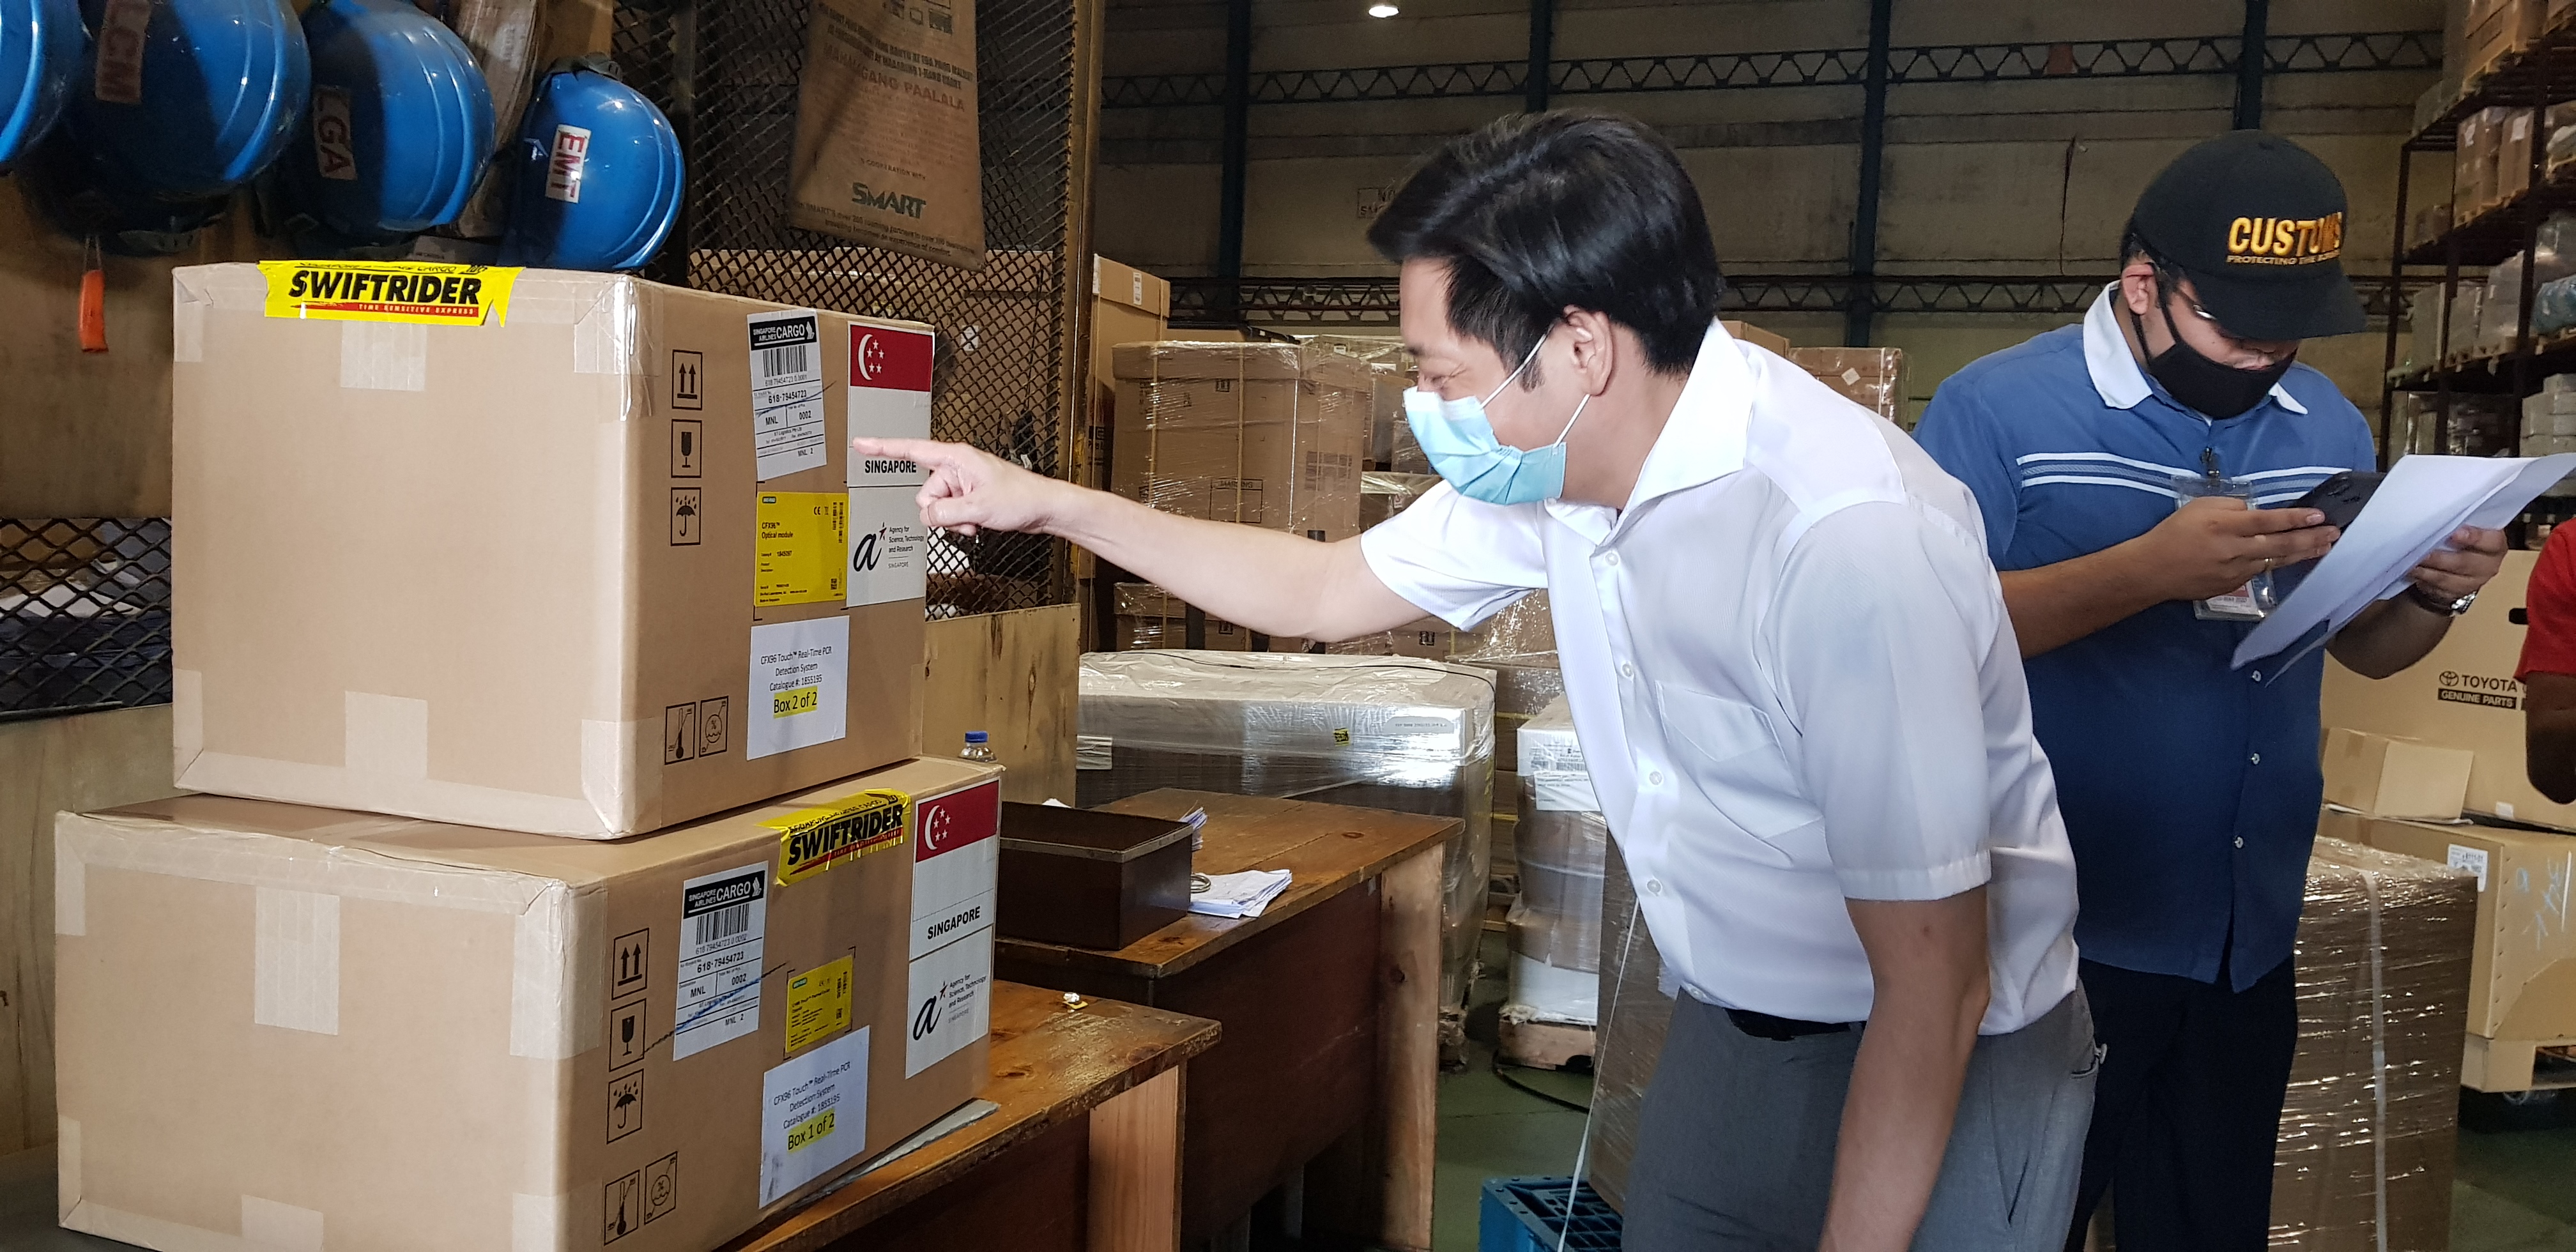 Singapore Ambassador to the Philippines Gerard Ho inspecting the shipment of COVID-19 diagnostic tests from Singapore at the Ninoy Aquino International Airport in Manila